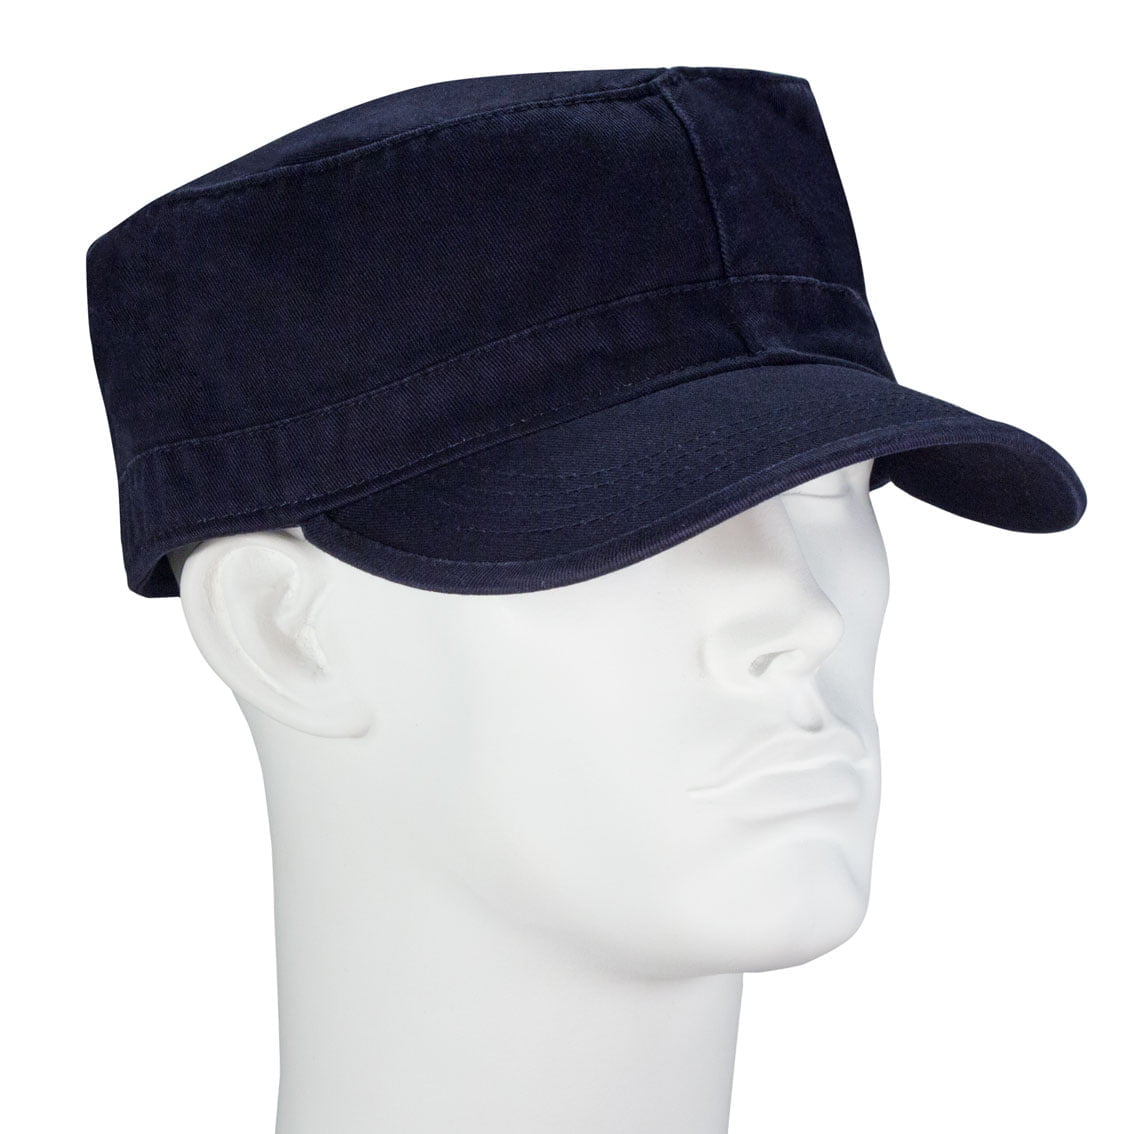 12pcs Navy Plain Castro Military Fatigue Army Hats - Fitted - Unconstructed - 100% Cotton - Bulk by the Dozen - Wholesale